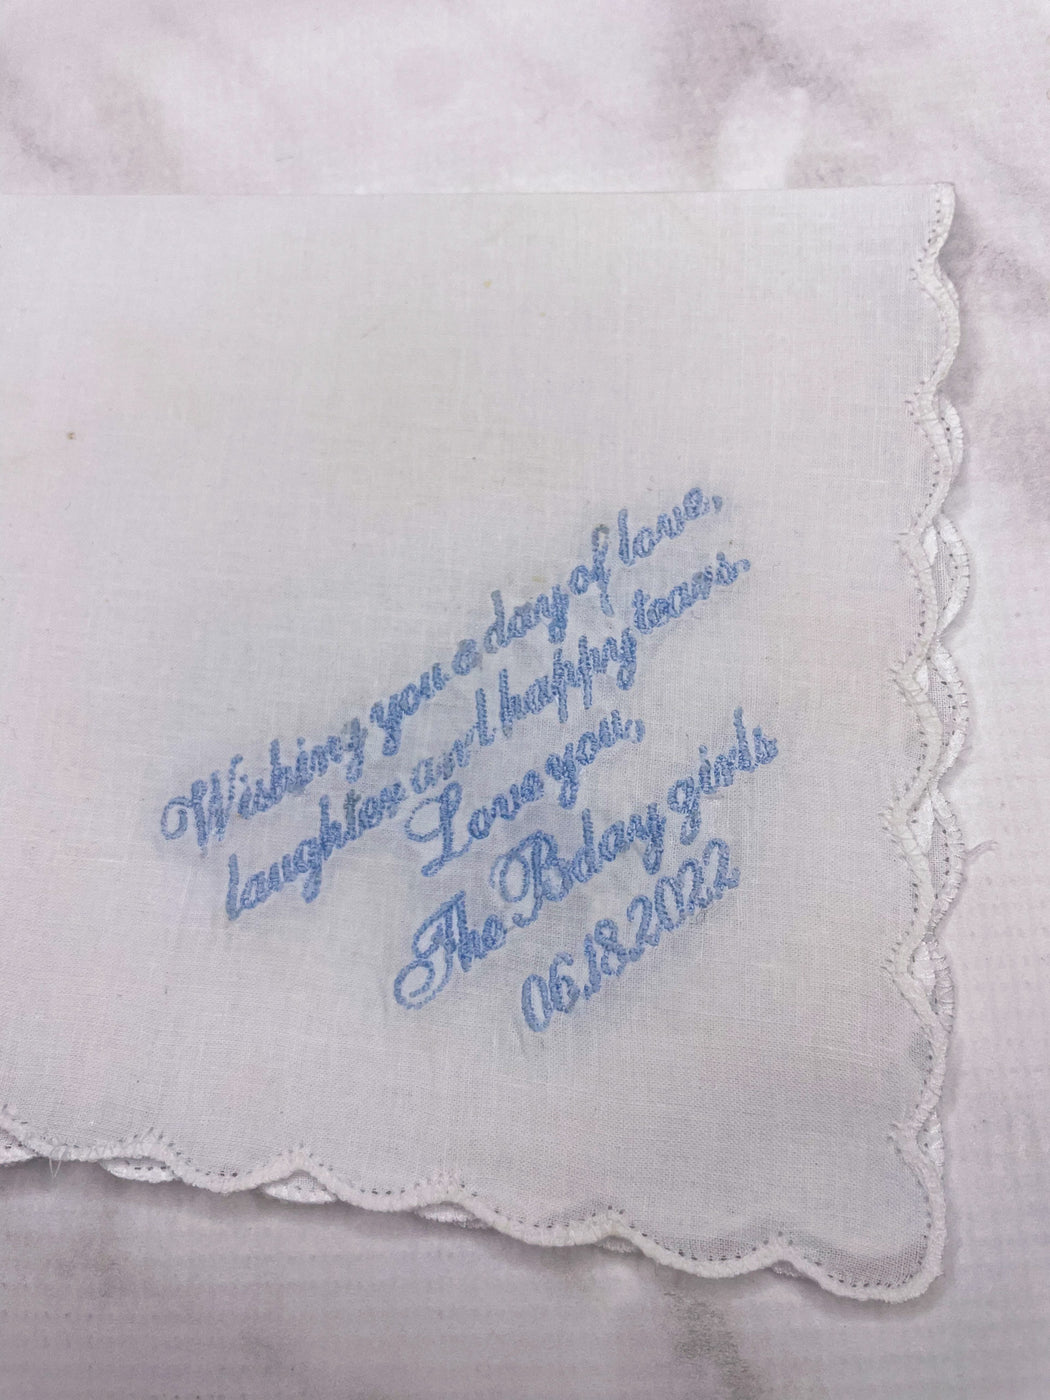 Free Form handkerchief to celebrate the special event